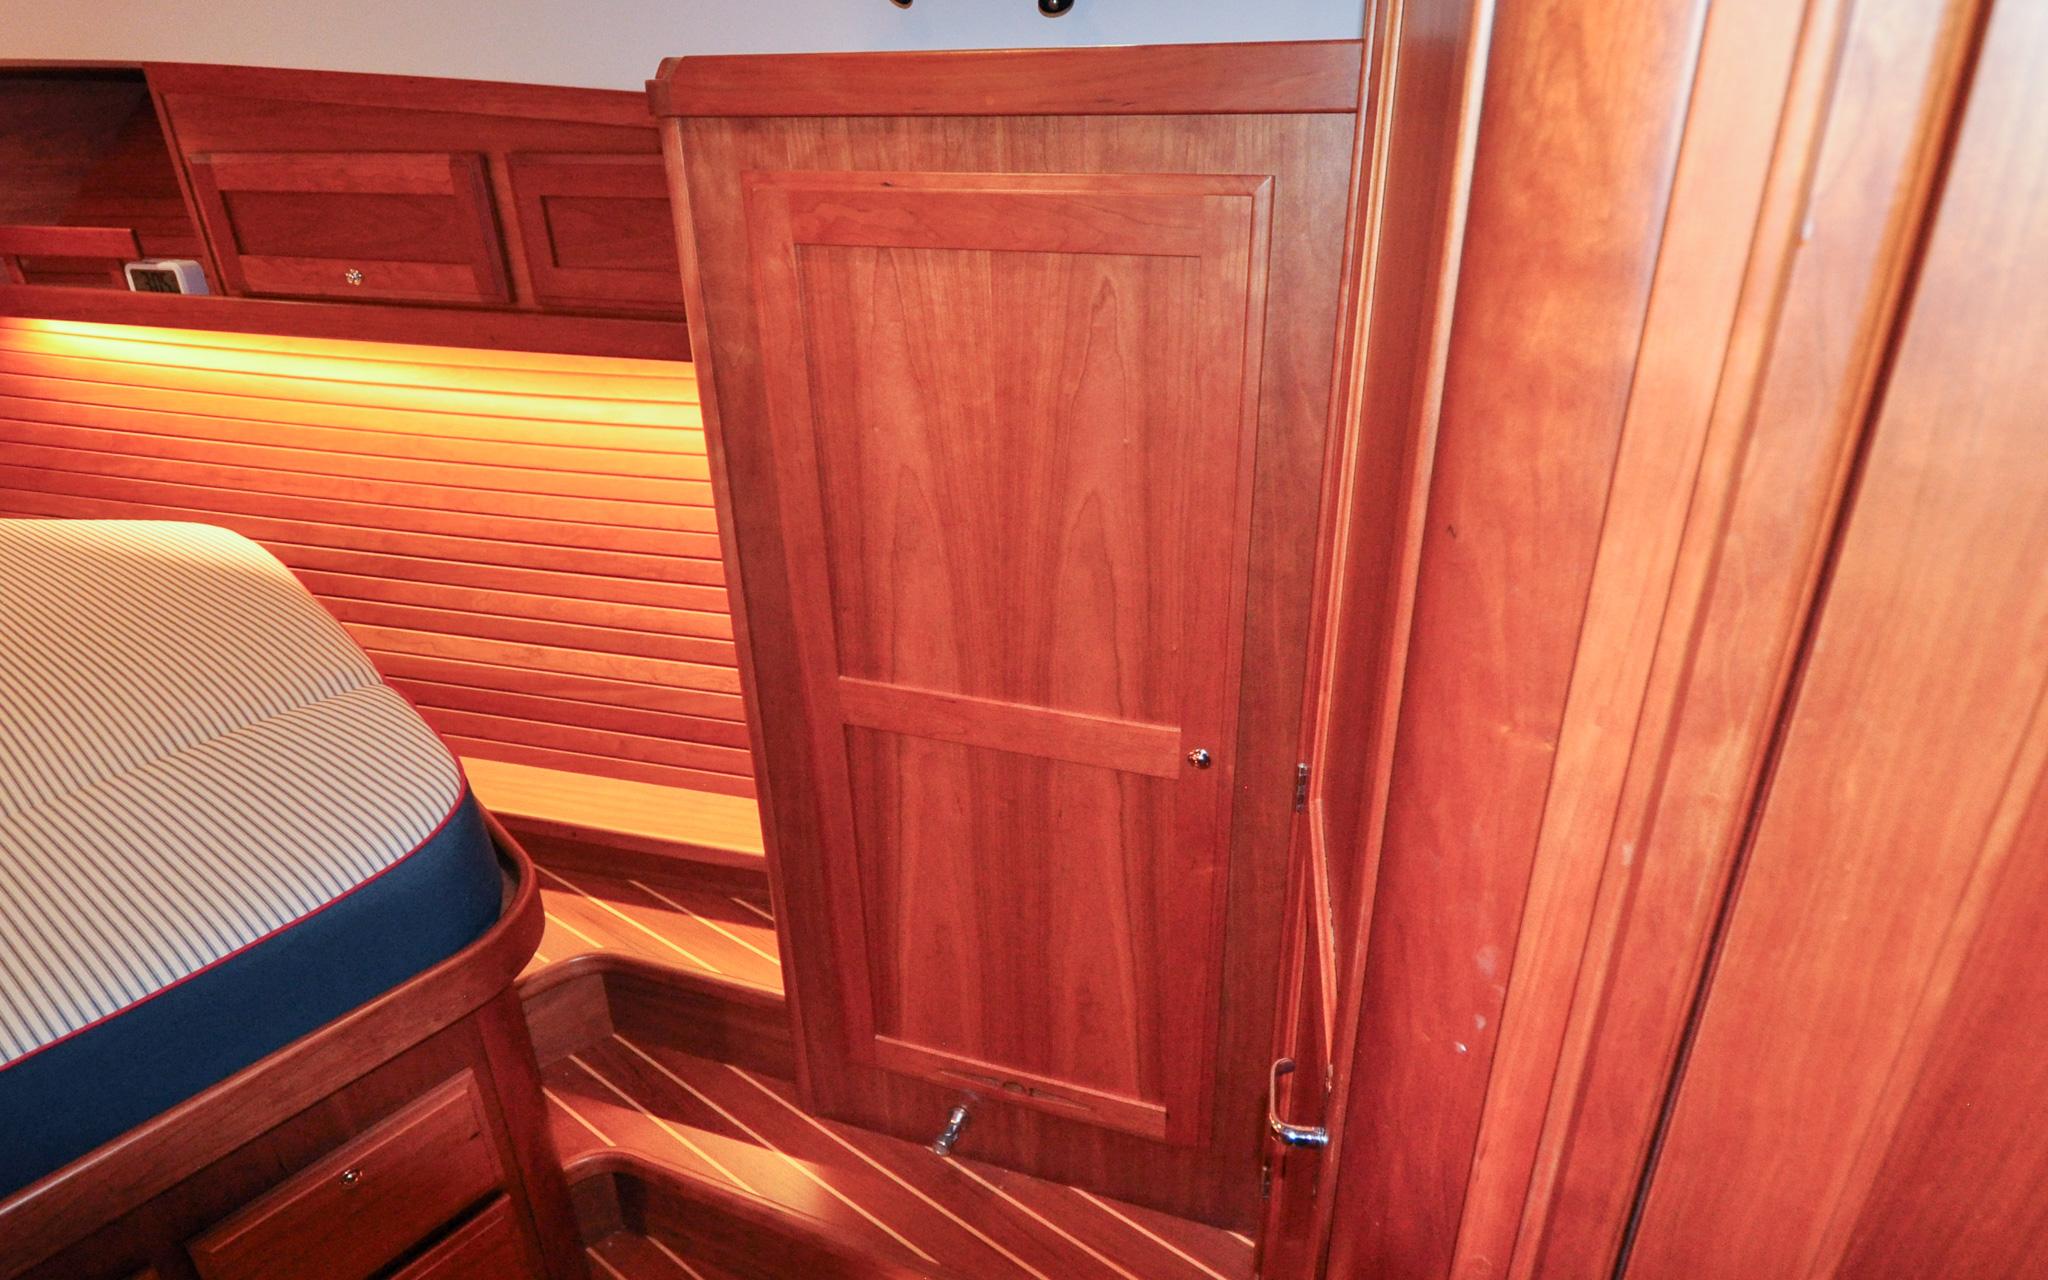 Sabre 38 Salon Express - Knot Done Yet - Owners Cabin